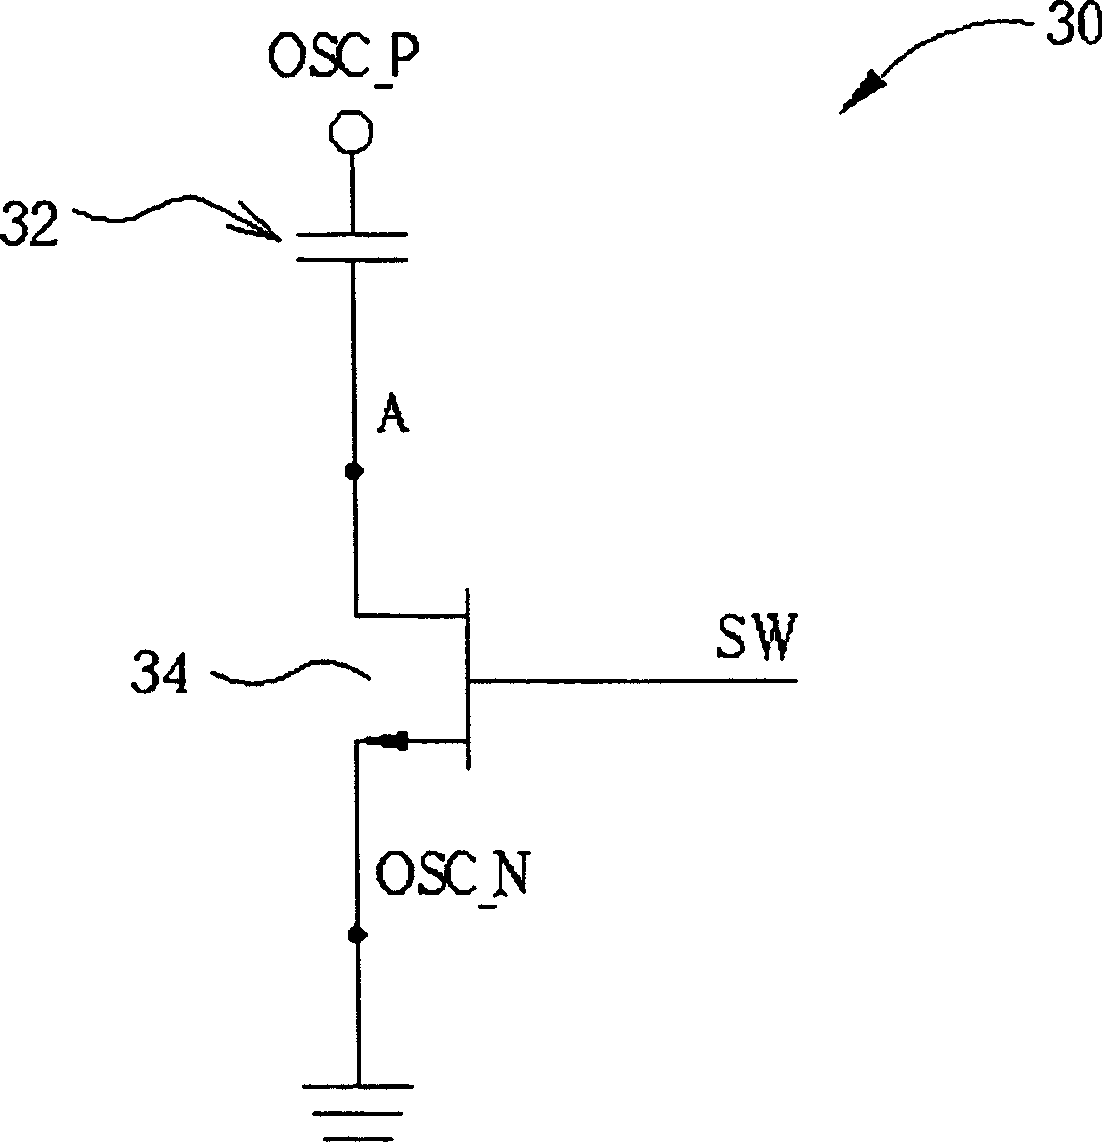 Switched capacitor circuit capable of eliminating clock feedthrough for vco